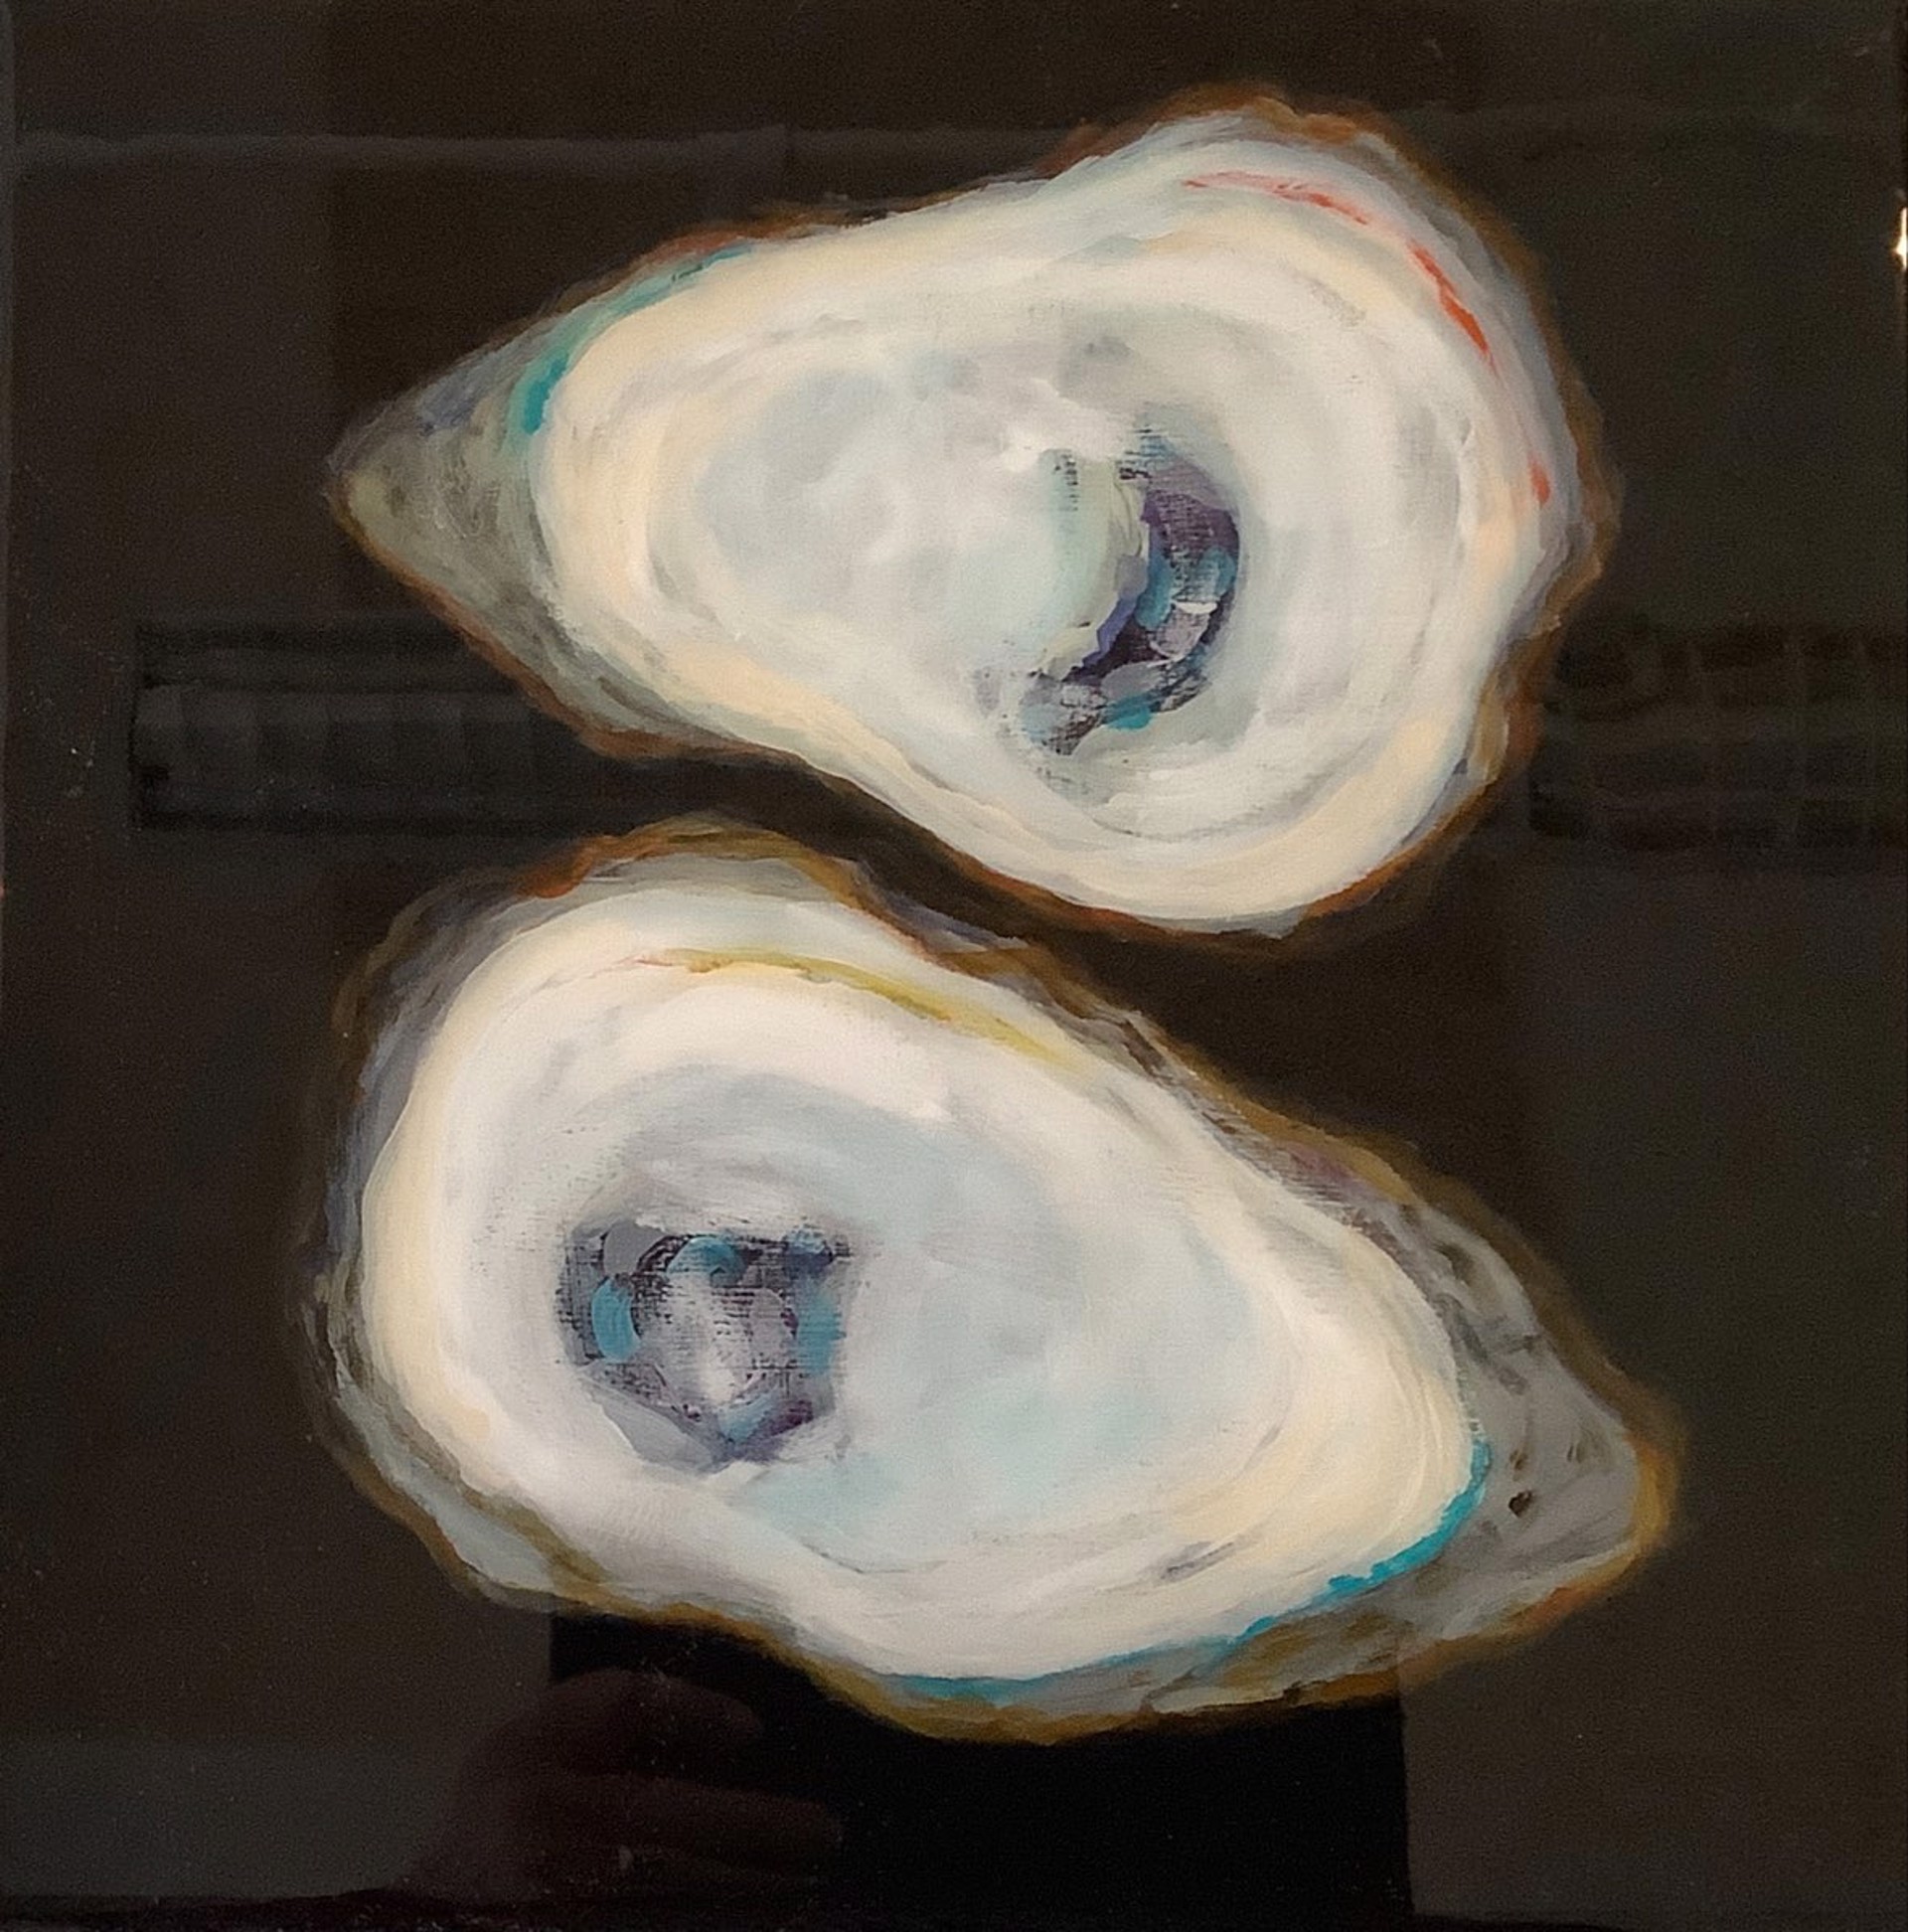 Double Black Oyster by Anne Harney